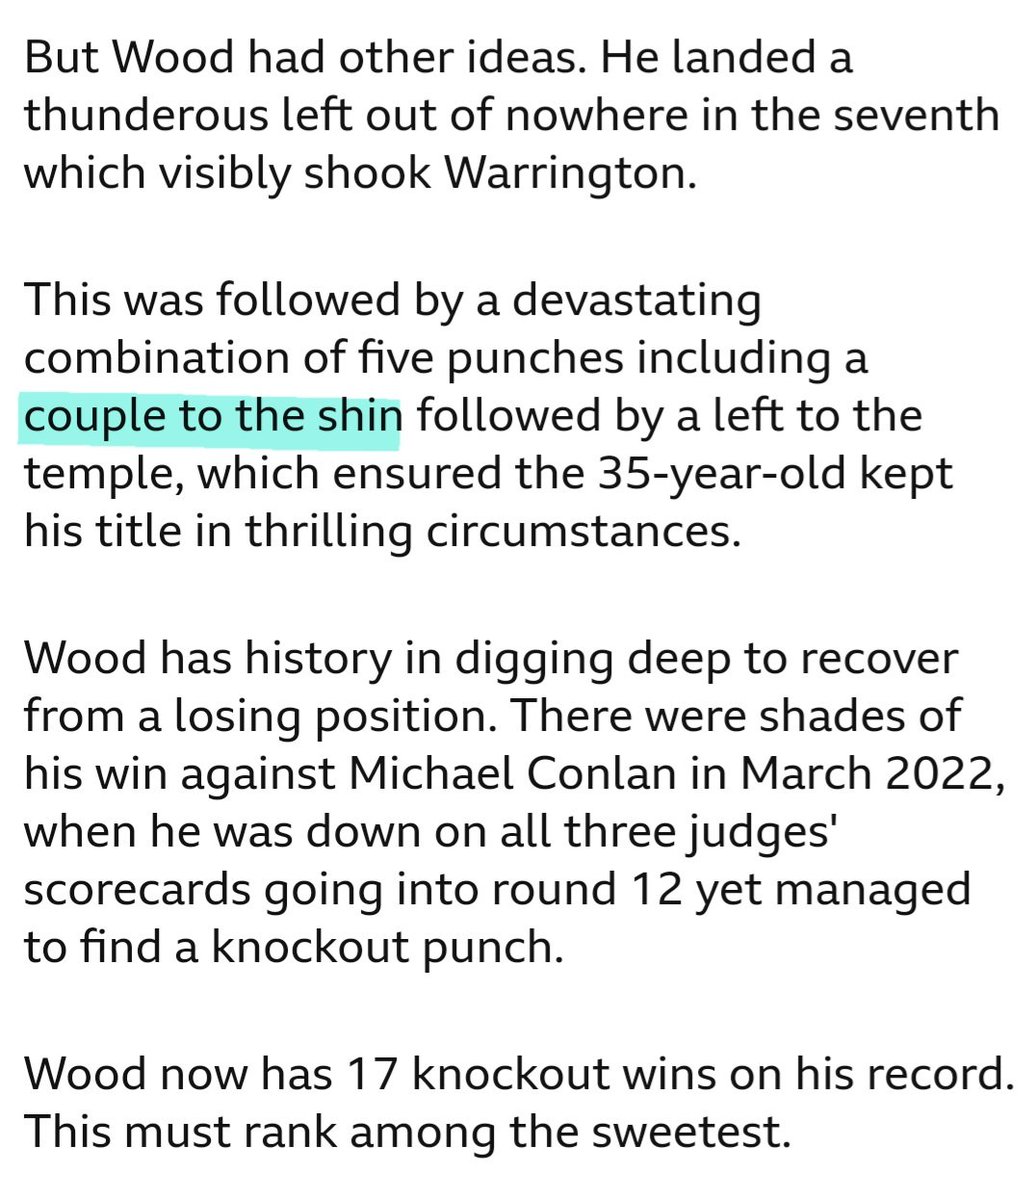 Definition of a low blow 😂 #bbcsport #proofread #WarringtonWood